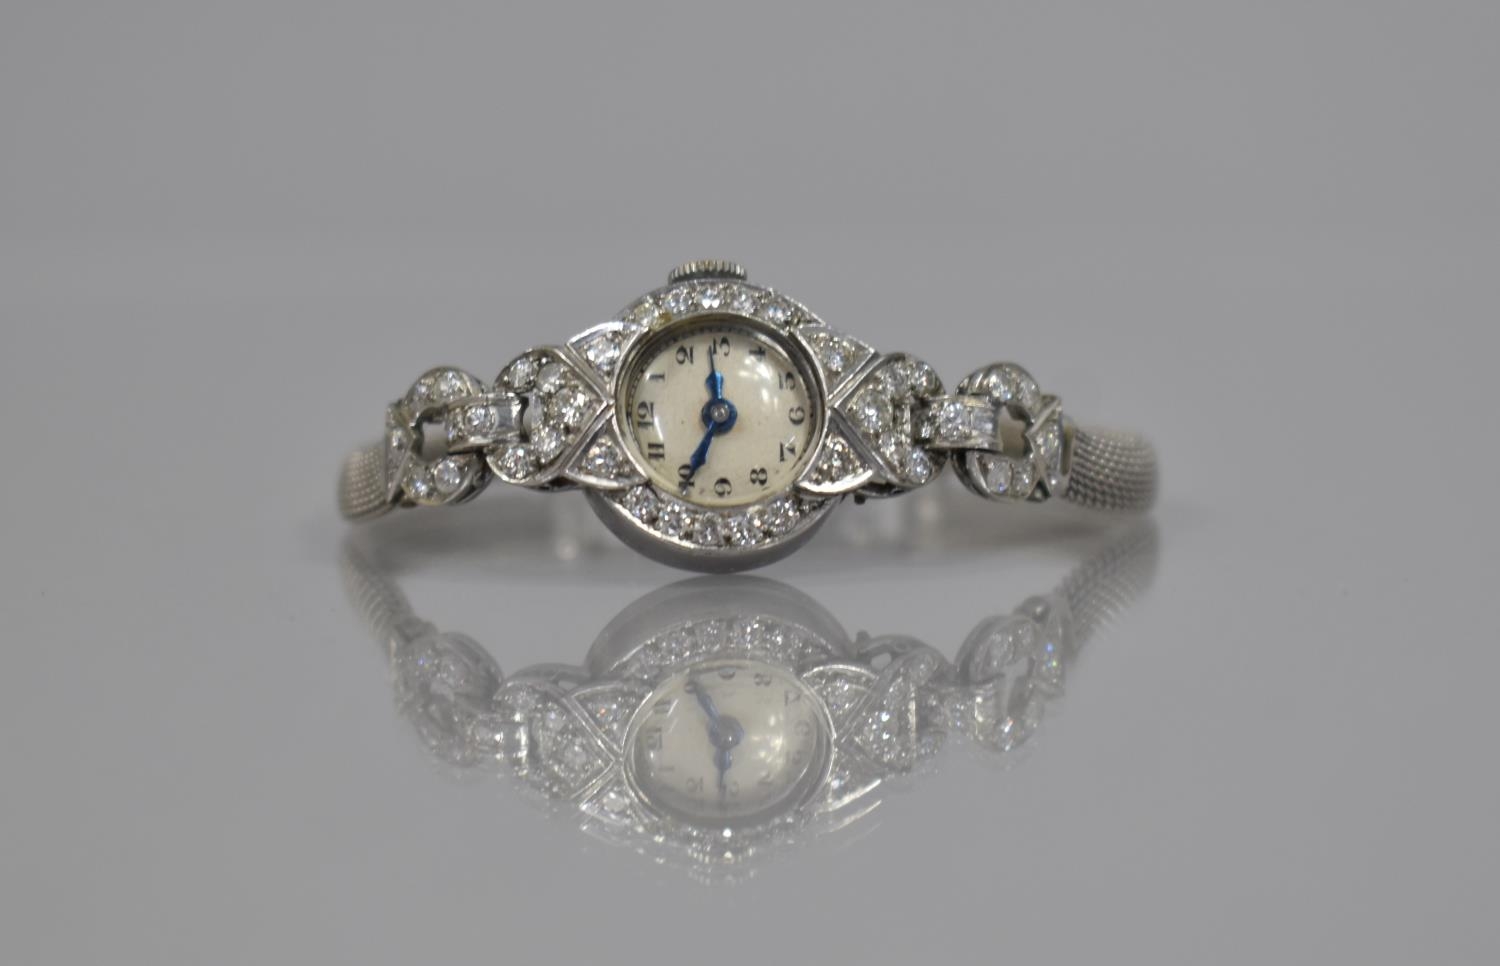 An Early to Mid 20th Century 9ct White Gold and Diamond Cocktail Watch. Silvered Dial with Arabic